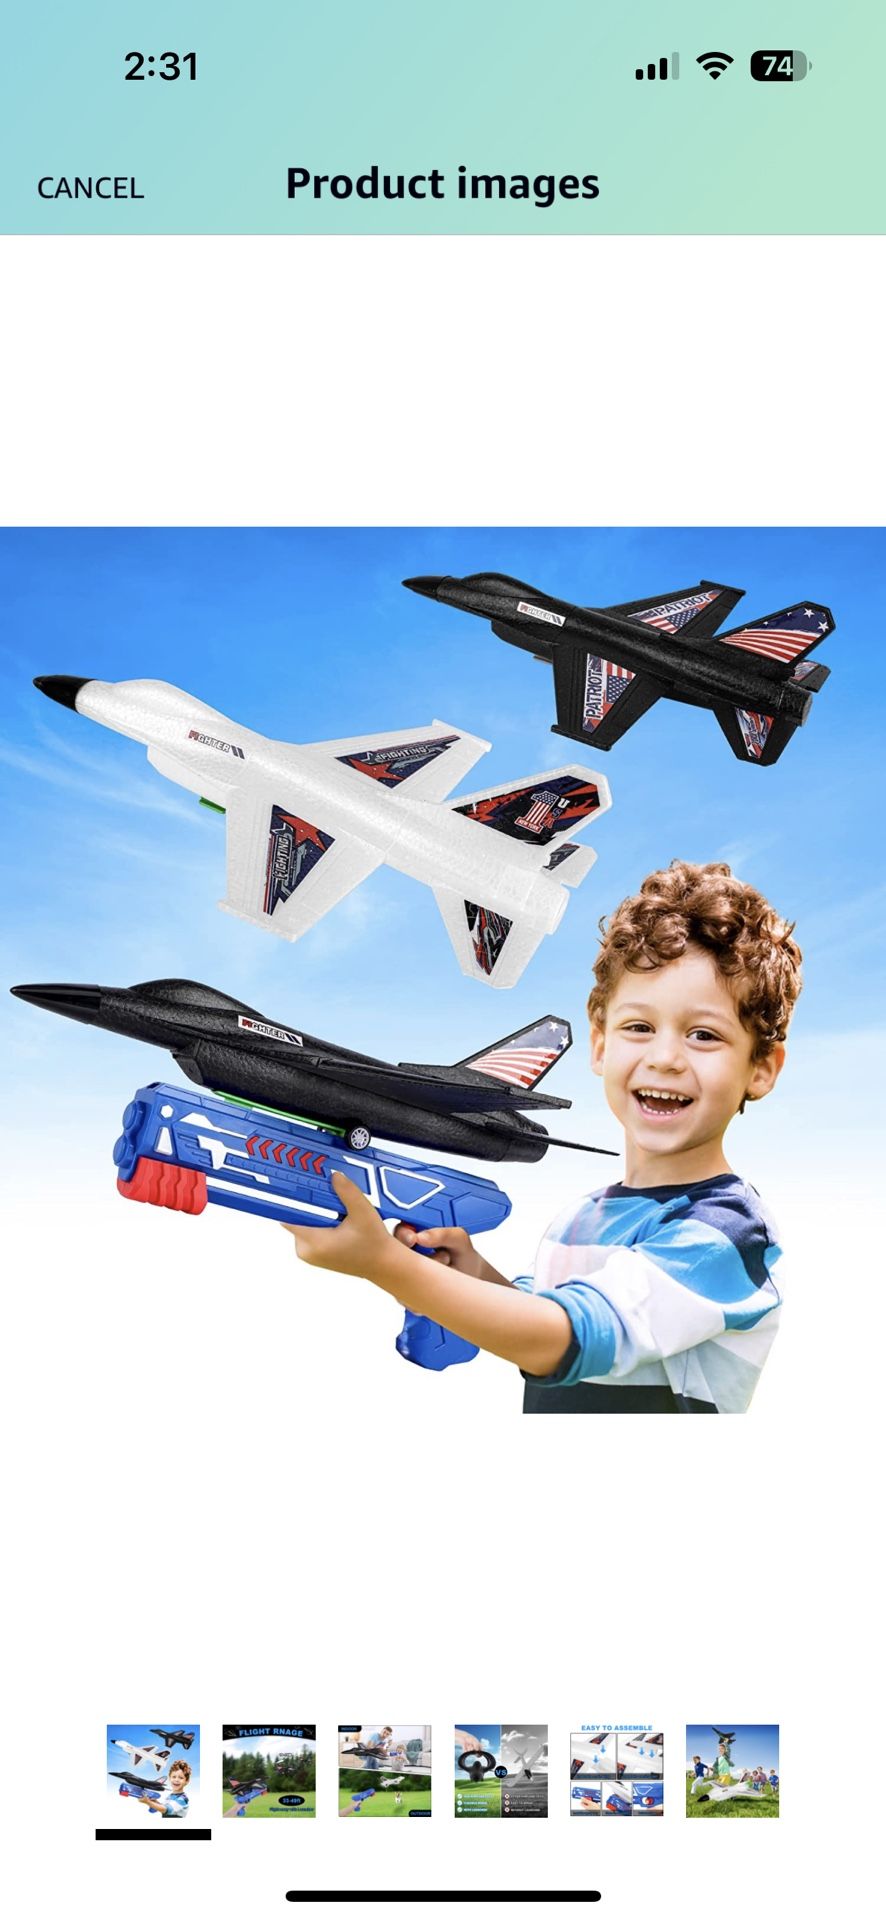 2 Pack Airplane Launcher Toy, 13.3" Jet F-16 Fighting Falcon, Catapult Plane Game Boy Toys for Kids Outdoor Flying Toys Birthday Gifts for 4 5 6 7 8 9